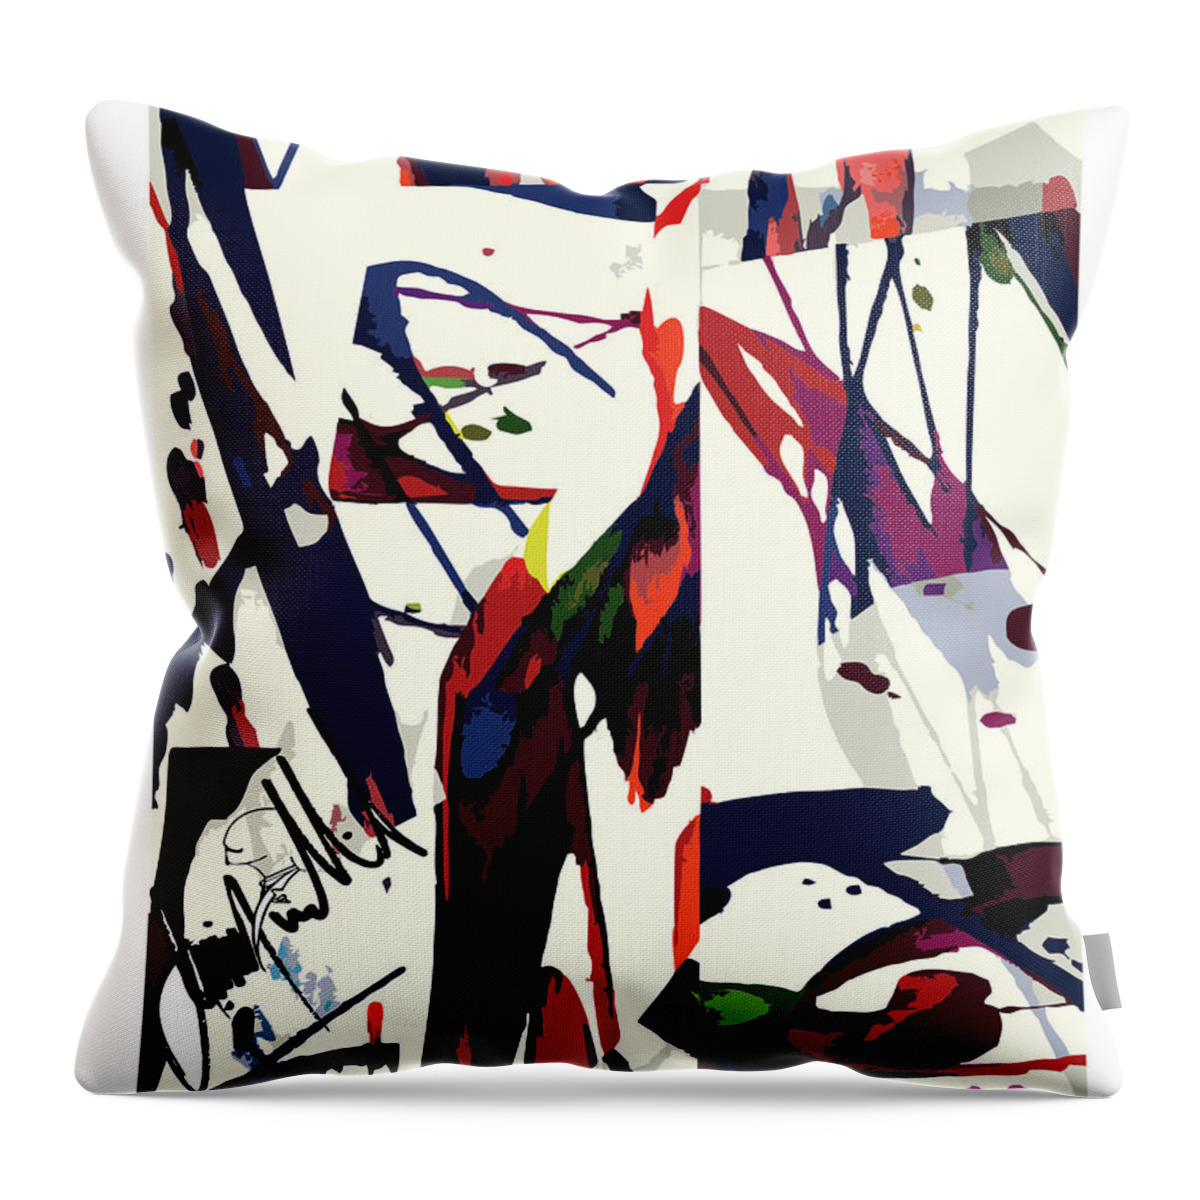  Throw Pillow featuring the digital art Wolf by Jimmy Williams